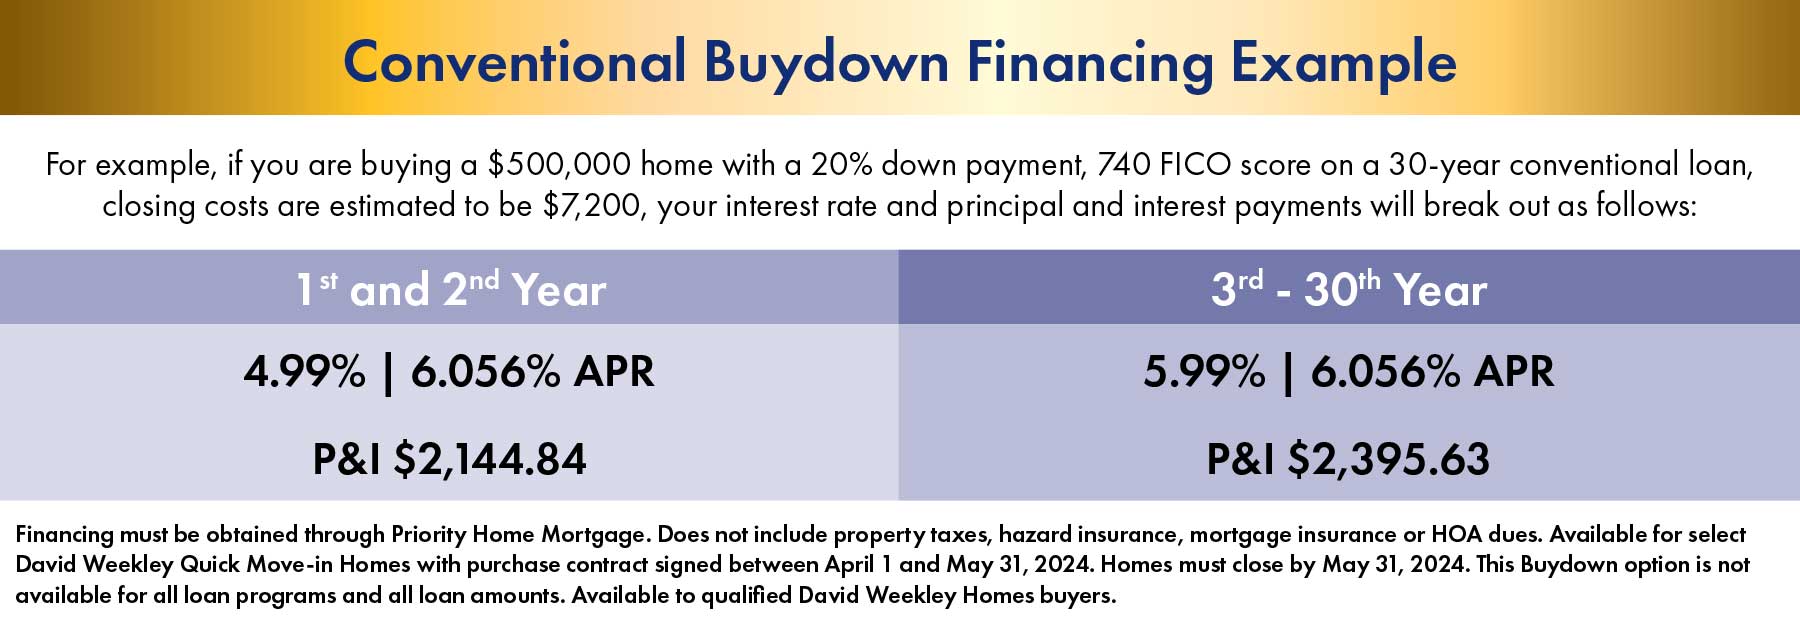 Conventional Buydown Financing Example